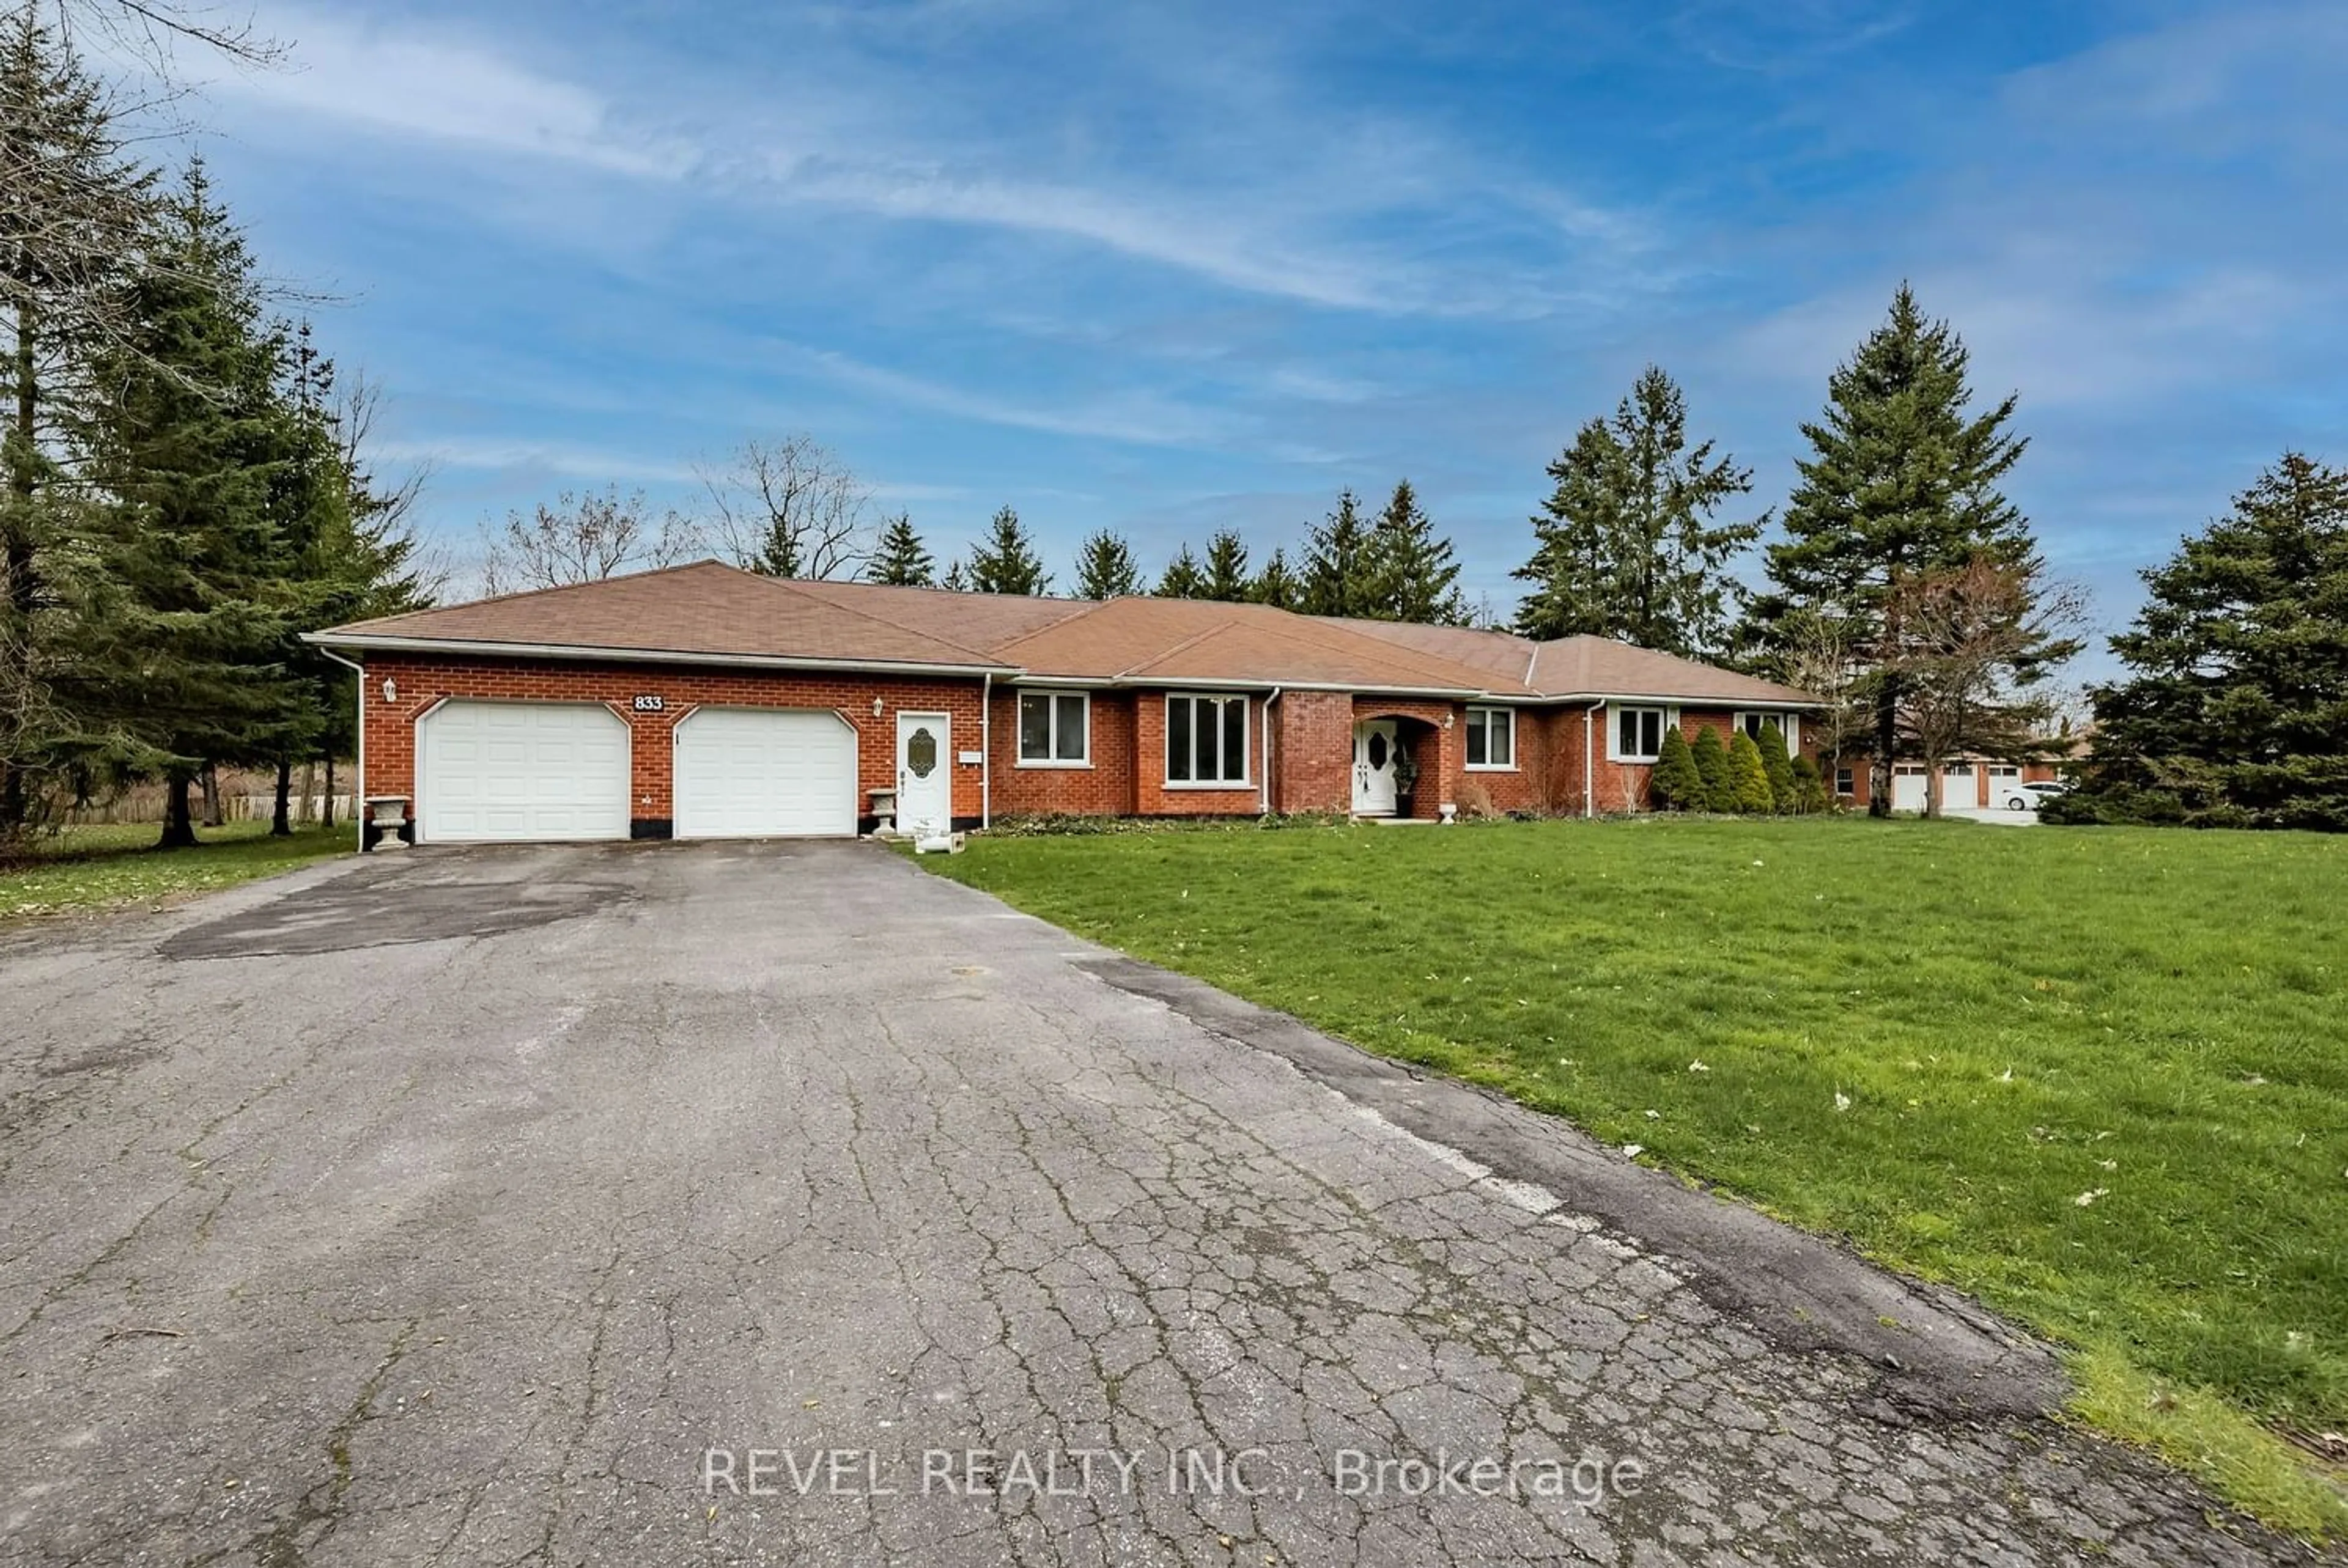 Frontside or backside of a home for 833 Rosehill Rd, Fort Erie Ontario L2A 5M4